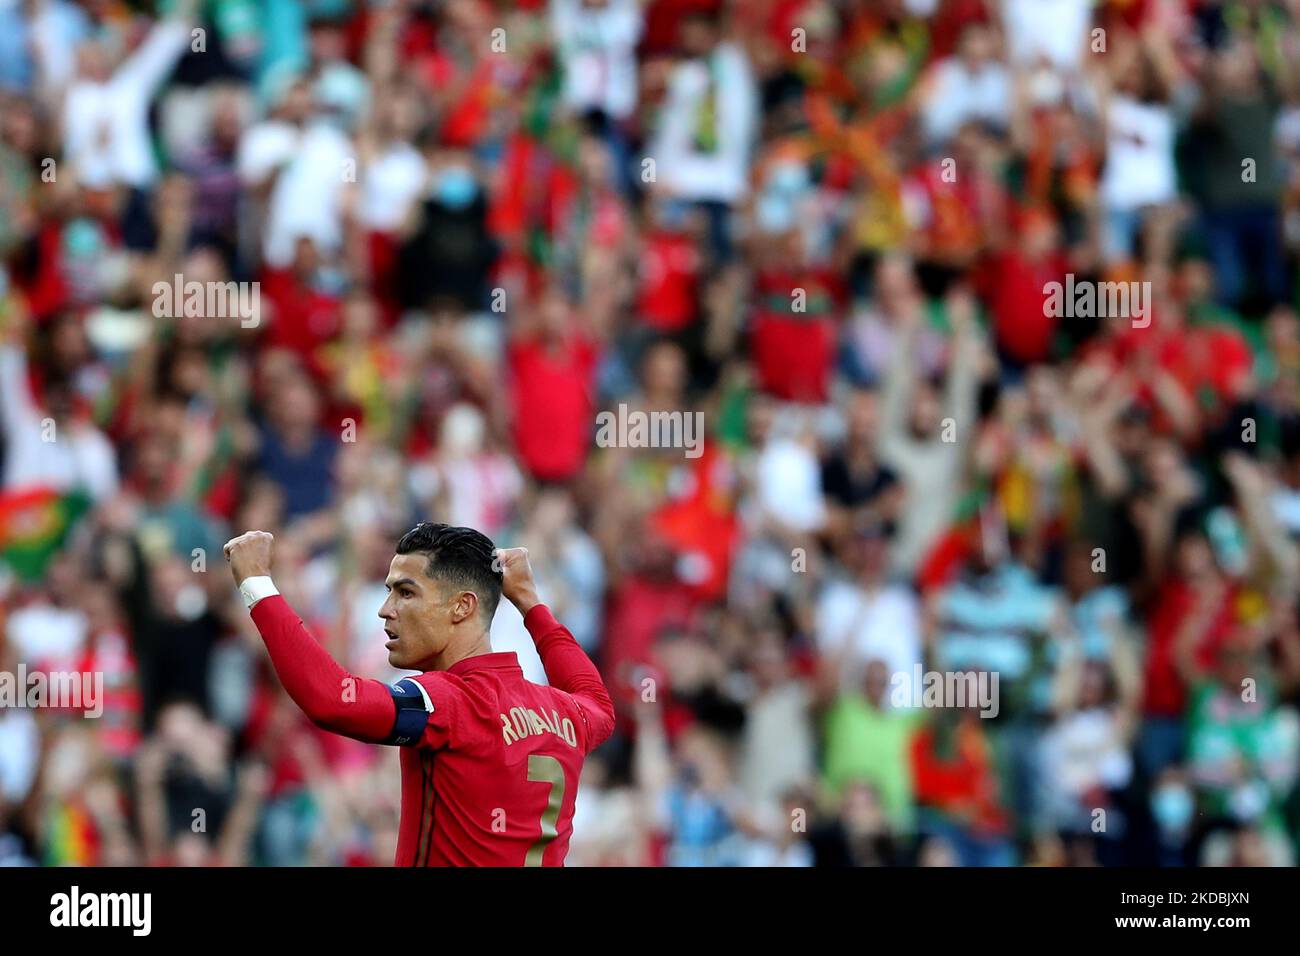 Cristiano Ronaldo of Portugal celebrates after William Carvalho scores a goal during the UEFA Nations League, league A group 2 match between Portugal and Switzerland at the Jose Alvalade stadium in Lisbon, Portugal, on June 5, 2022. (Photo by Pedro FiÃºza/NurPhoto) Stock Photo